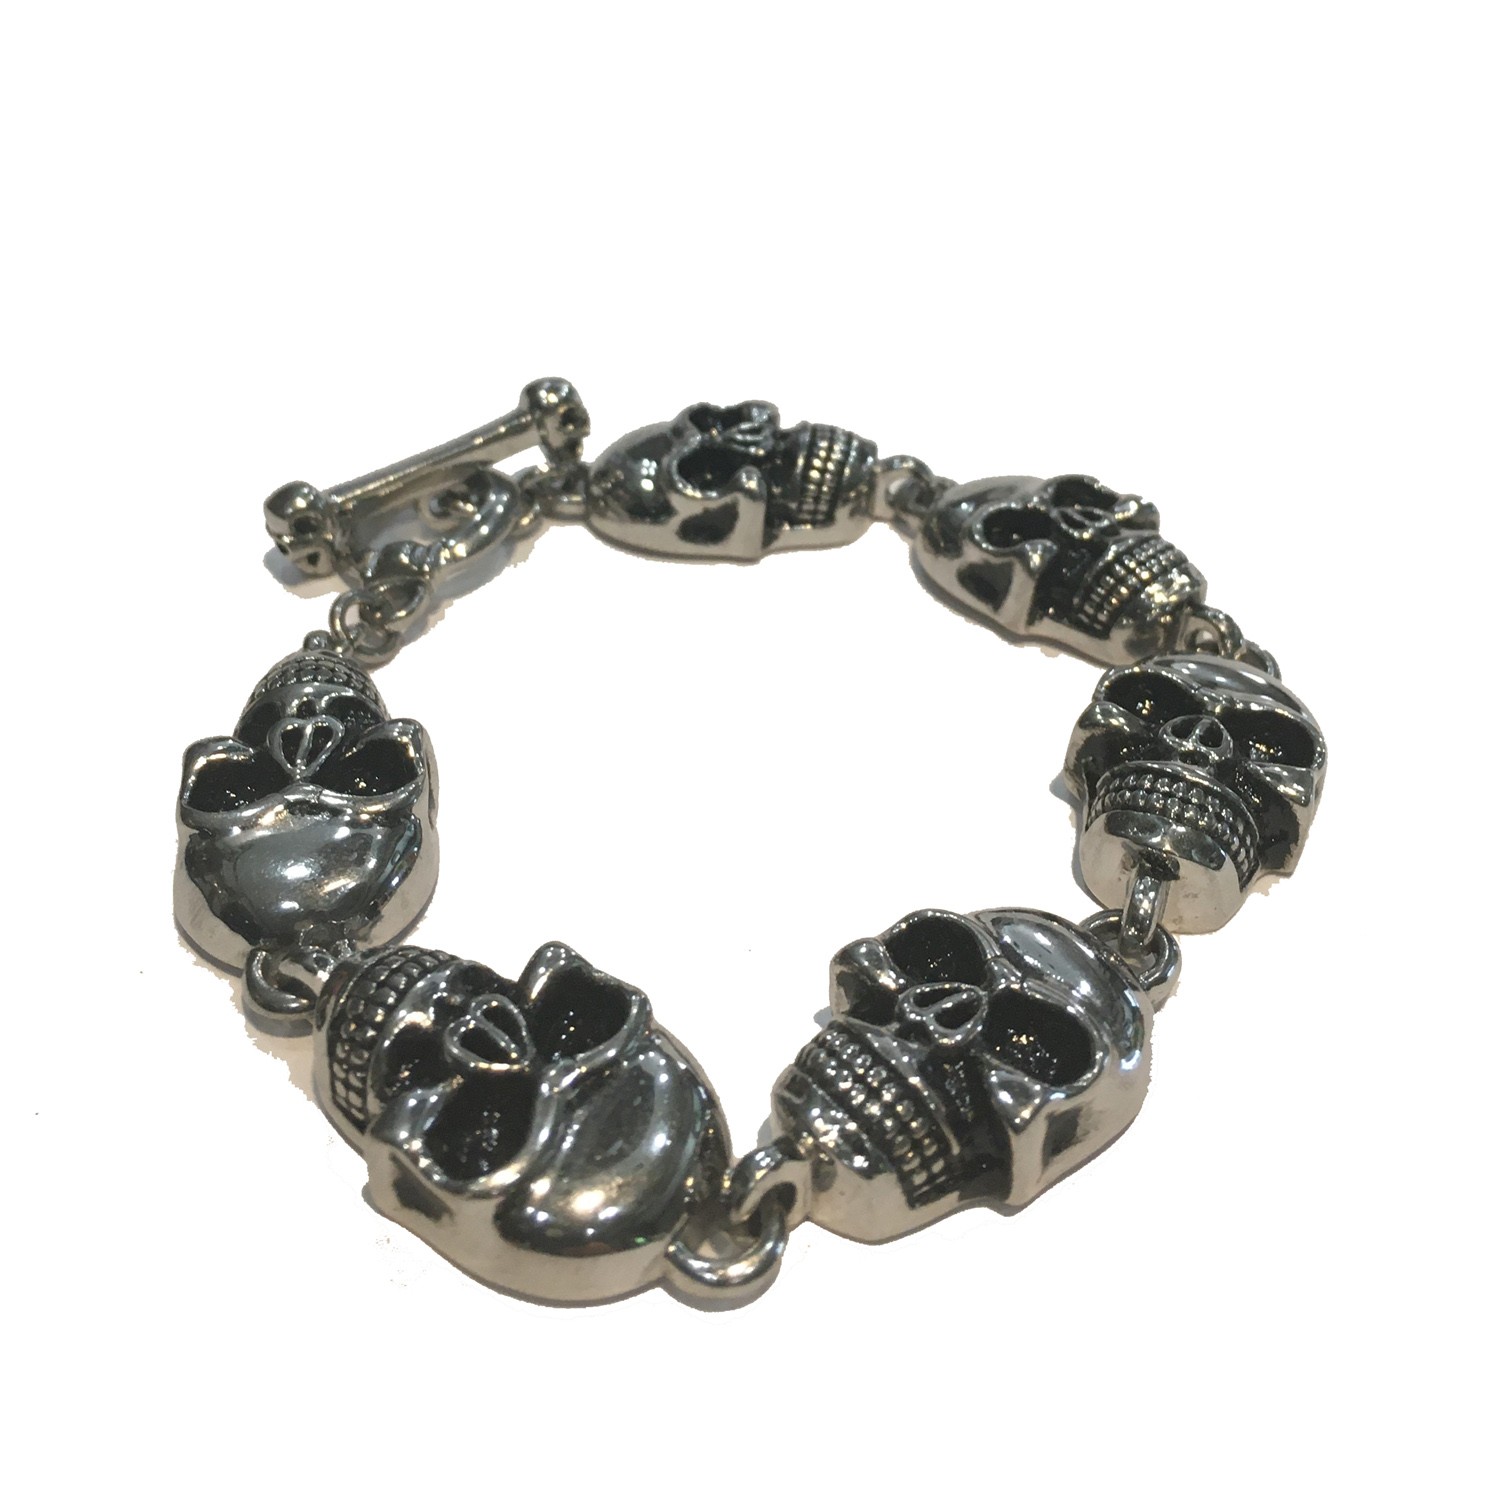 SKULL SILVER CHAIN UNISEX BRACELET WITH TOGGLE CLASP STAINLESS STEEL